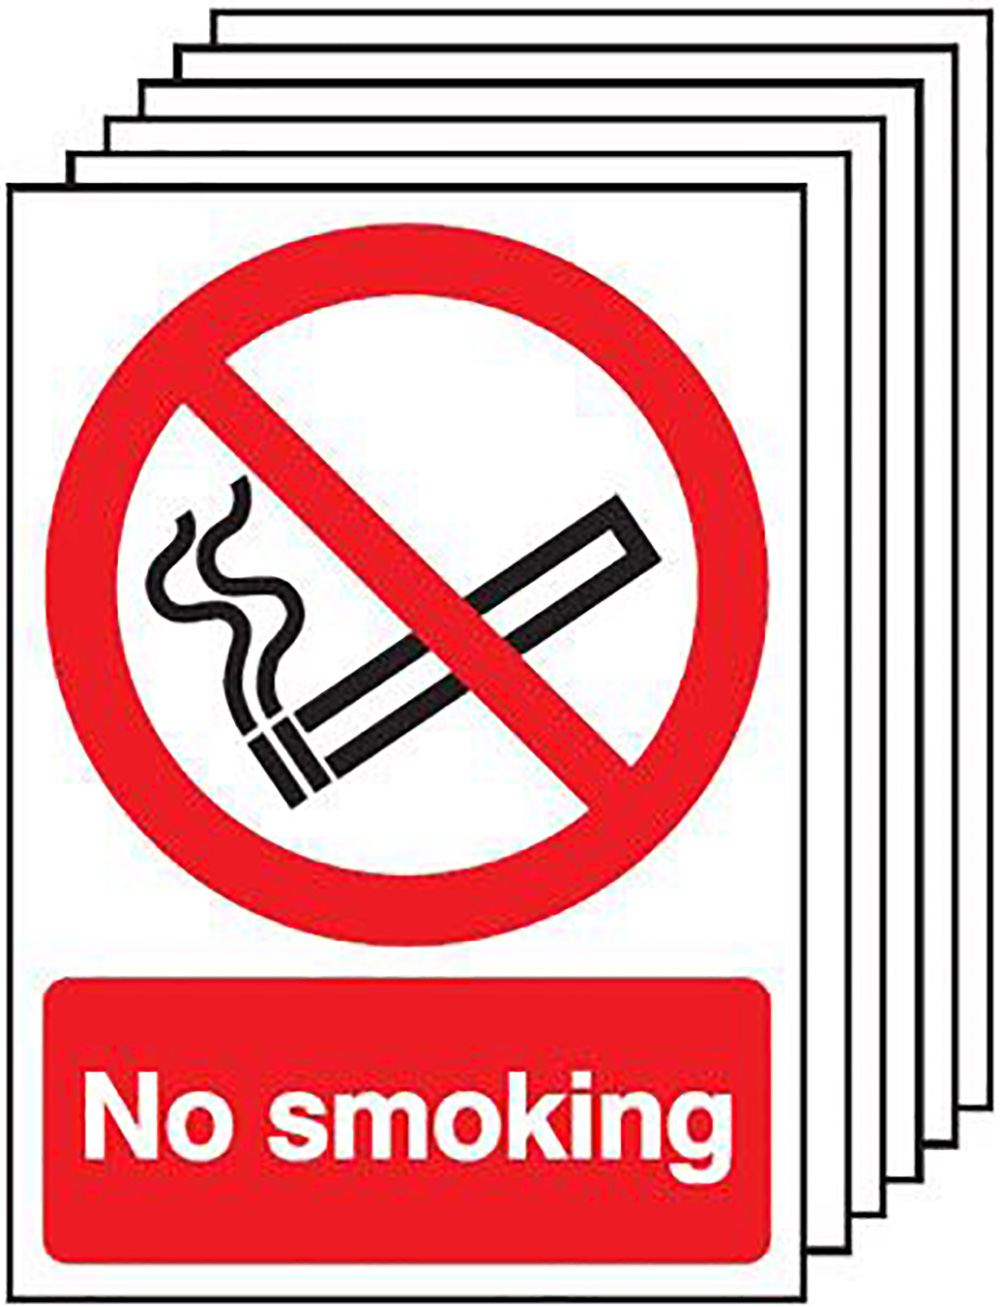 No Smoking    297x210mm 1.2mm Rigid Plastic Safety Sign Pack of 6 